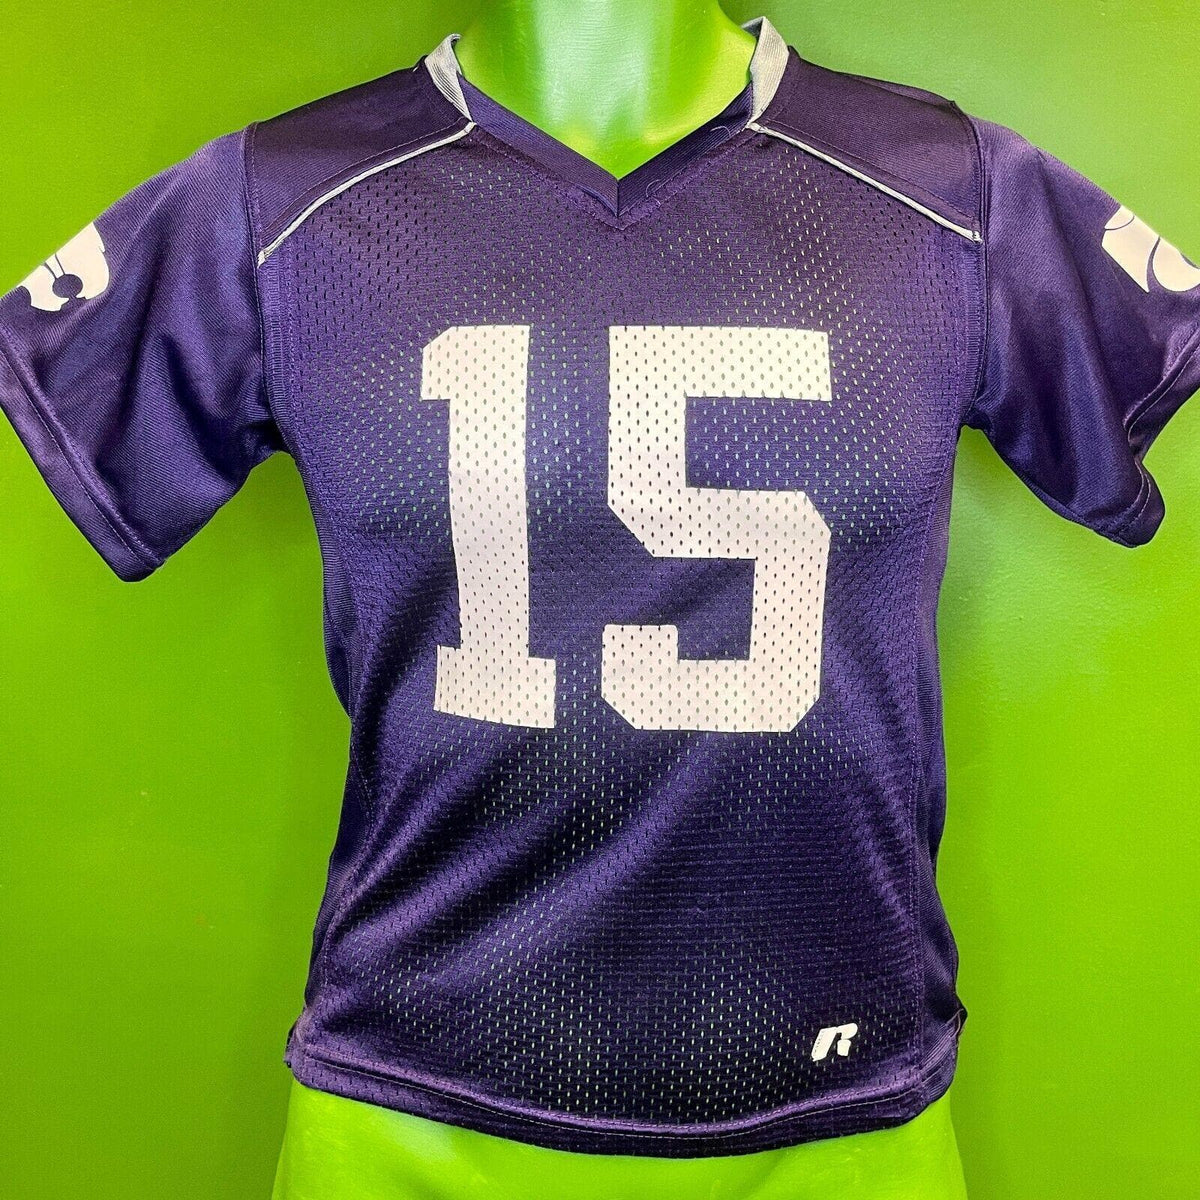 NCAA Kansas State Wildcats #15 Russell Jersey Youth Small 6-7 (30")